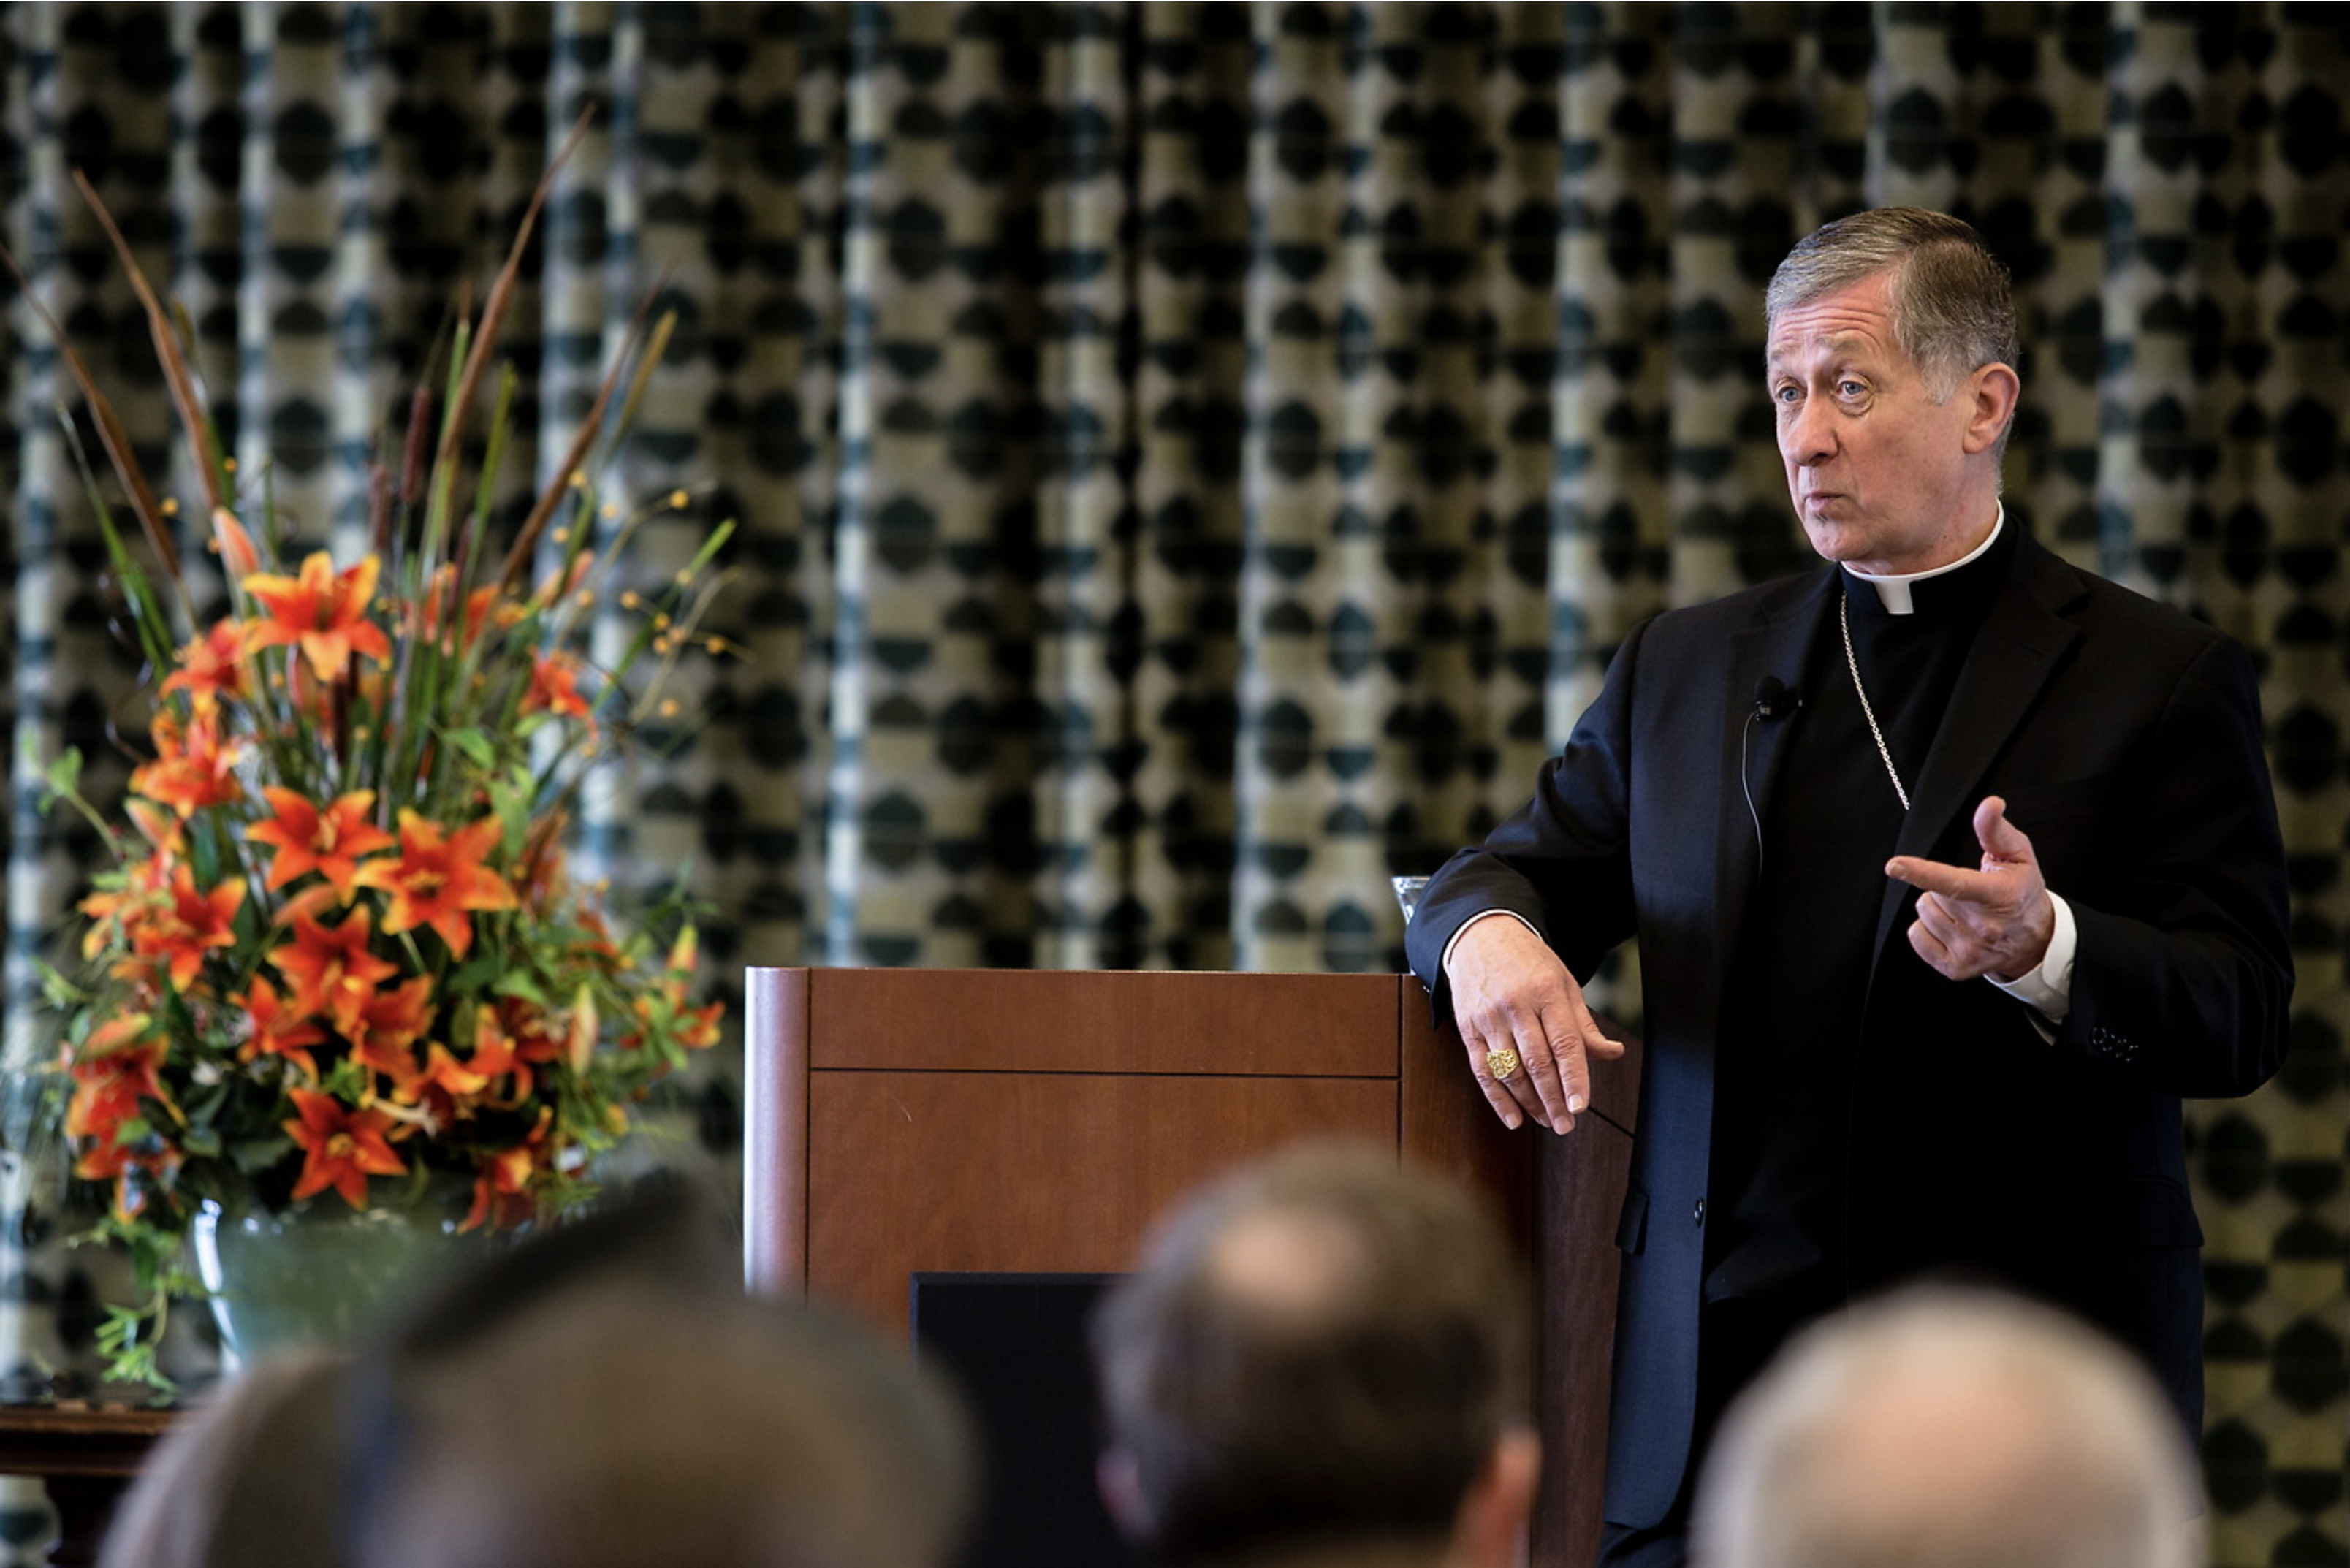 SPRING 2019: Quo Vadis? Scholars and Journalists Discuss the Future of Catholicism 